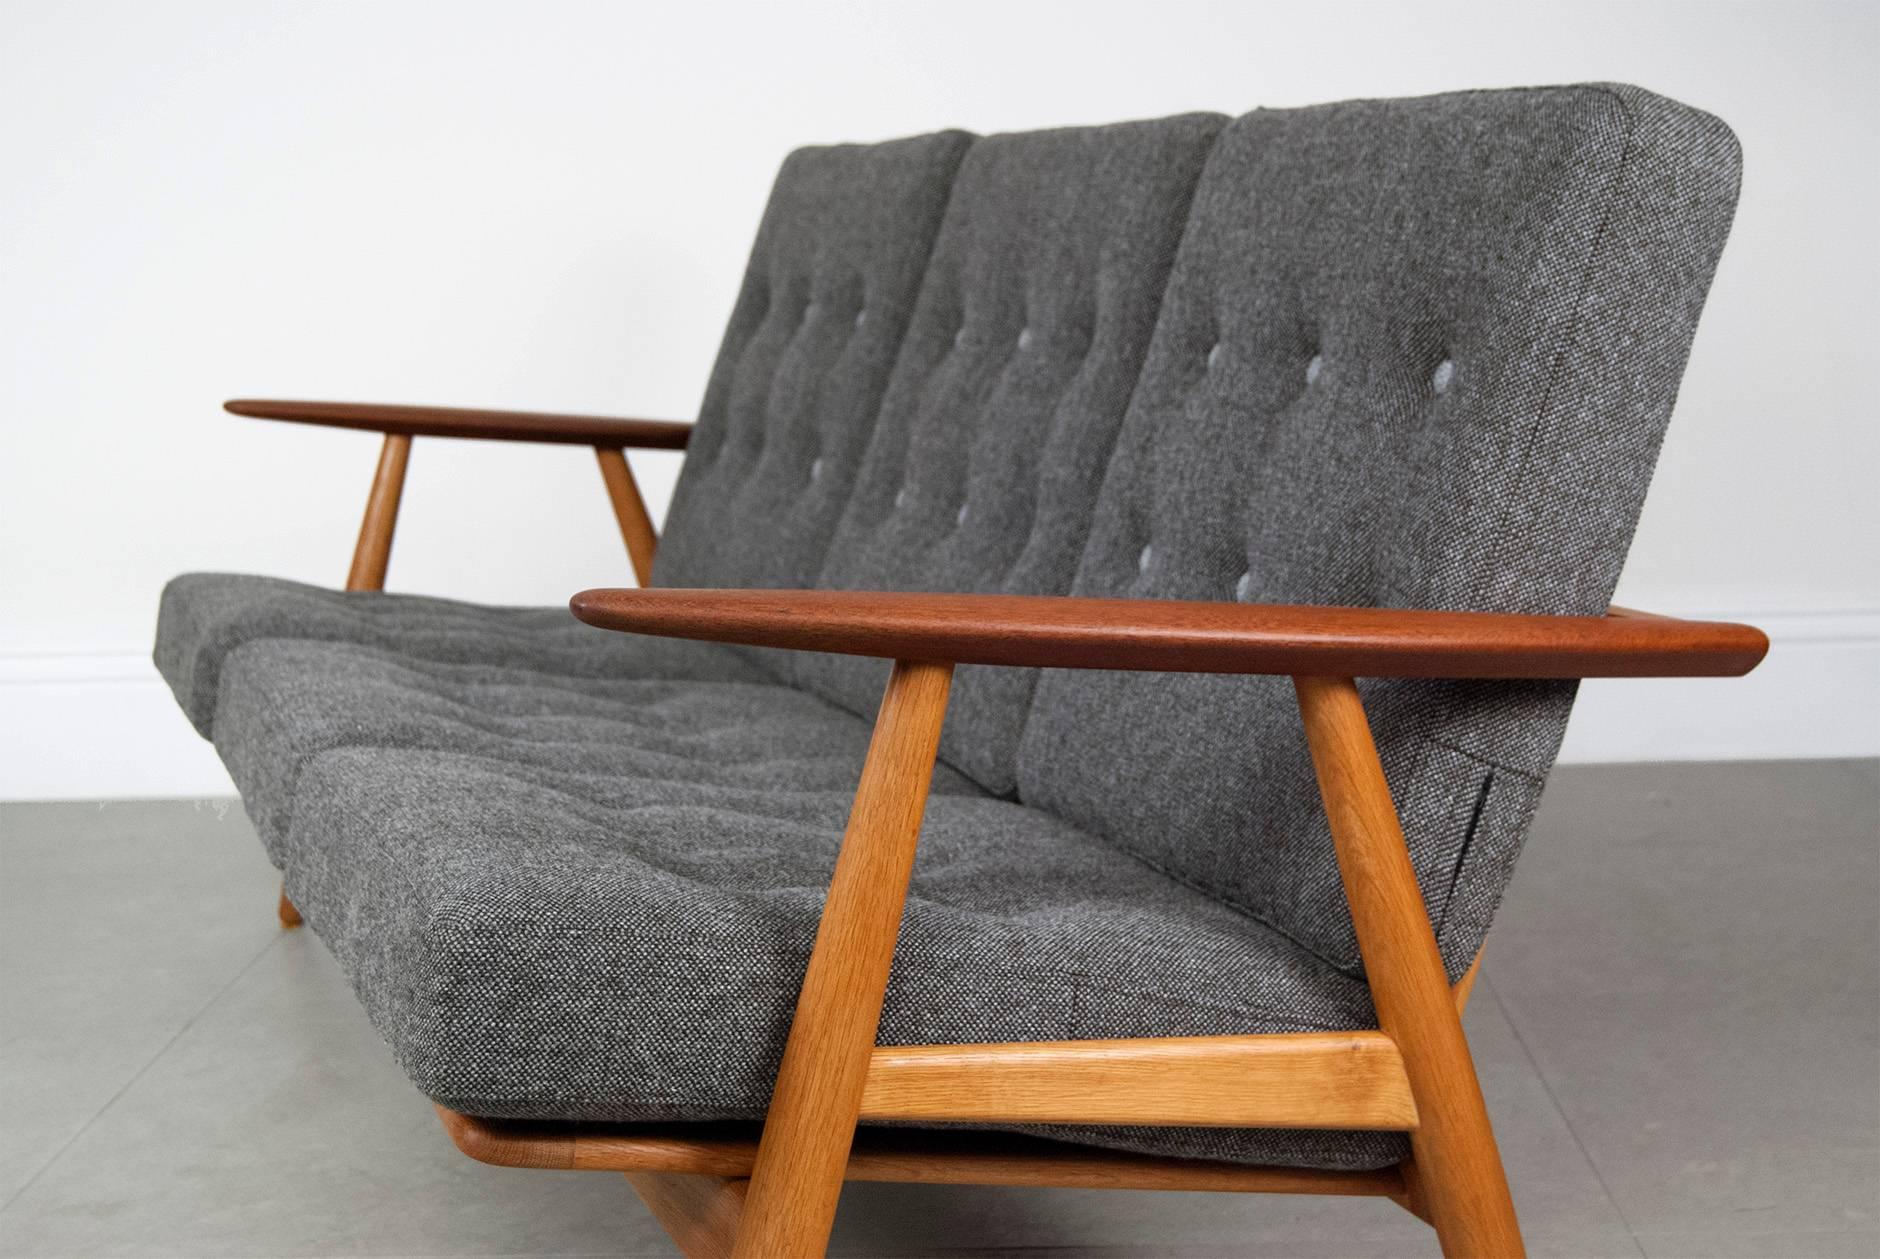 Hans J. Wegner.

GE-240 'Cigar' sofa, 1955.

Three-seat sofa with oak frame and contrasting teak armrests. Original sprung cushions recovered in Kvadrat Hallingdal wool fabric with contrasting buttons. Produced by GETAMA, Denmark.